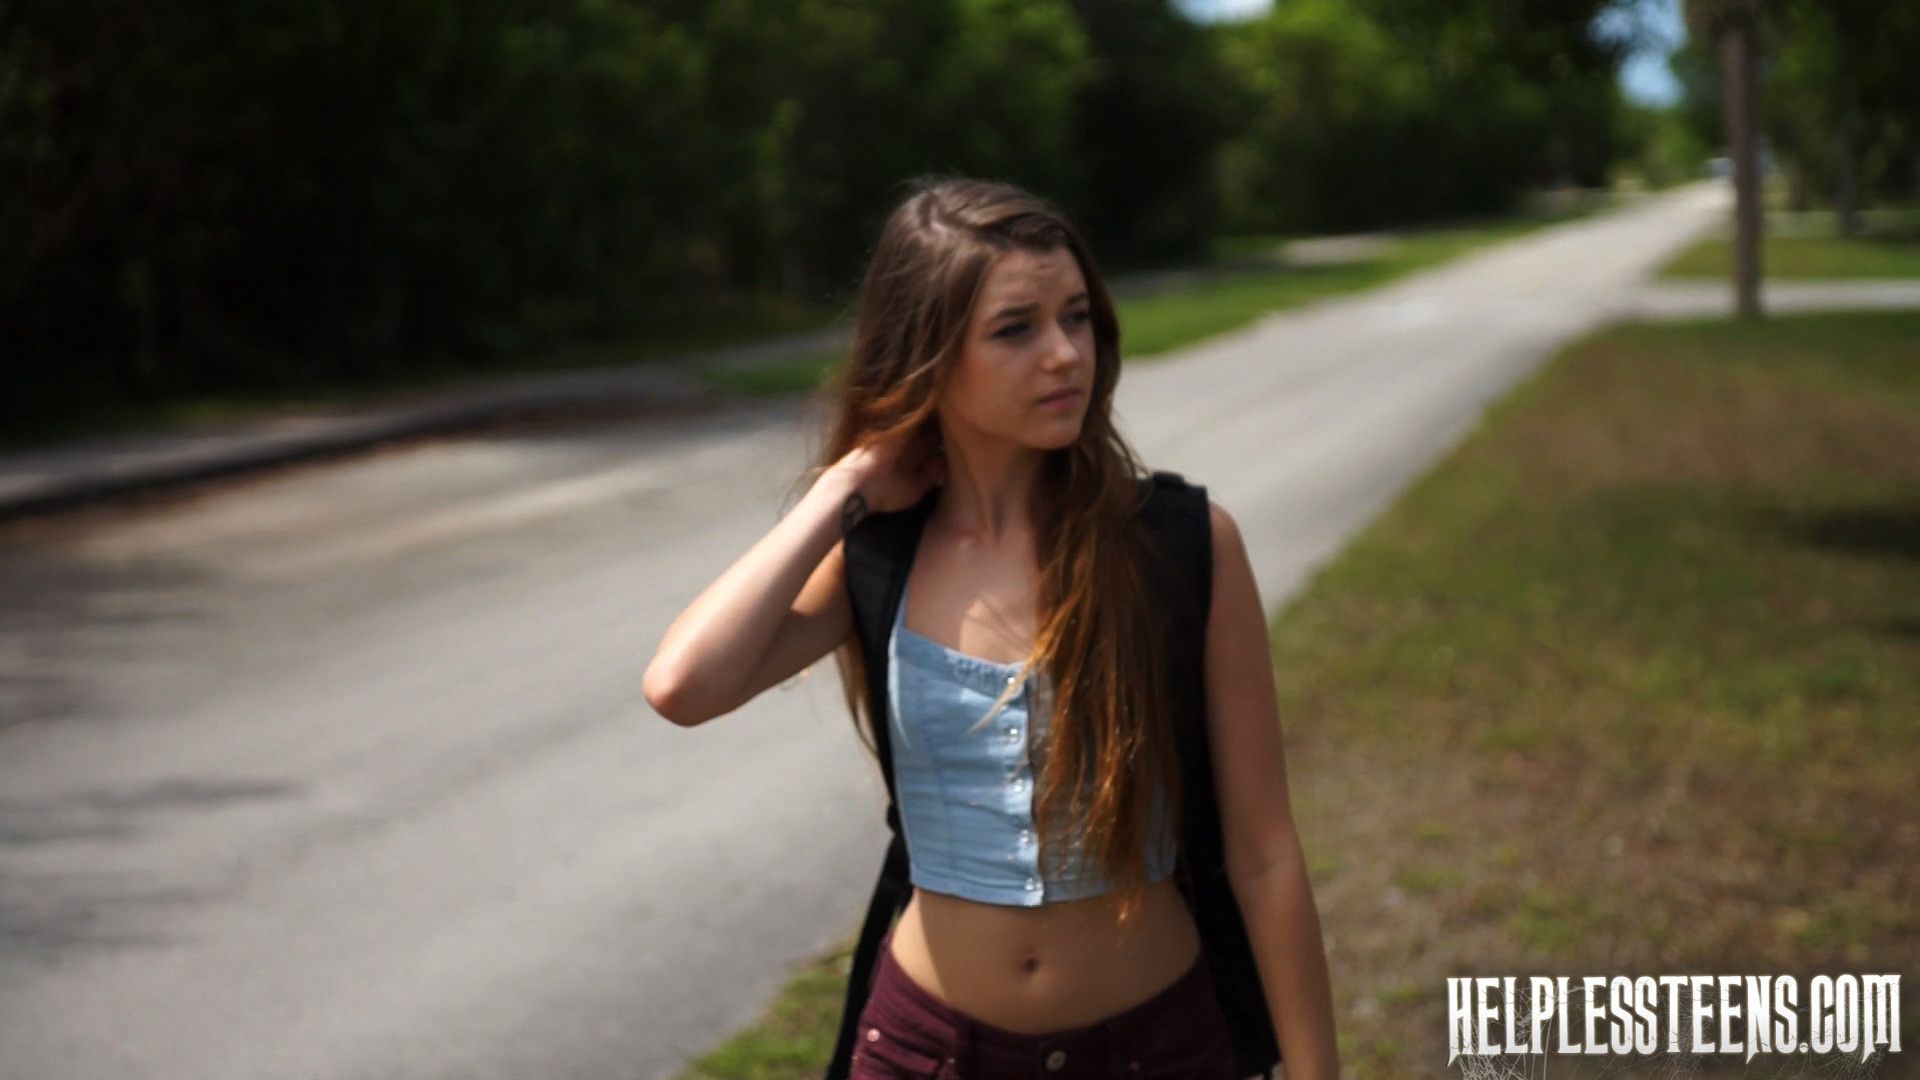 Helpless teen alex mae went out for a hike. she took a wrong turn and is now los